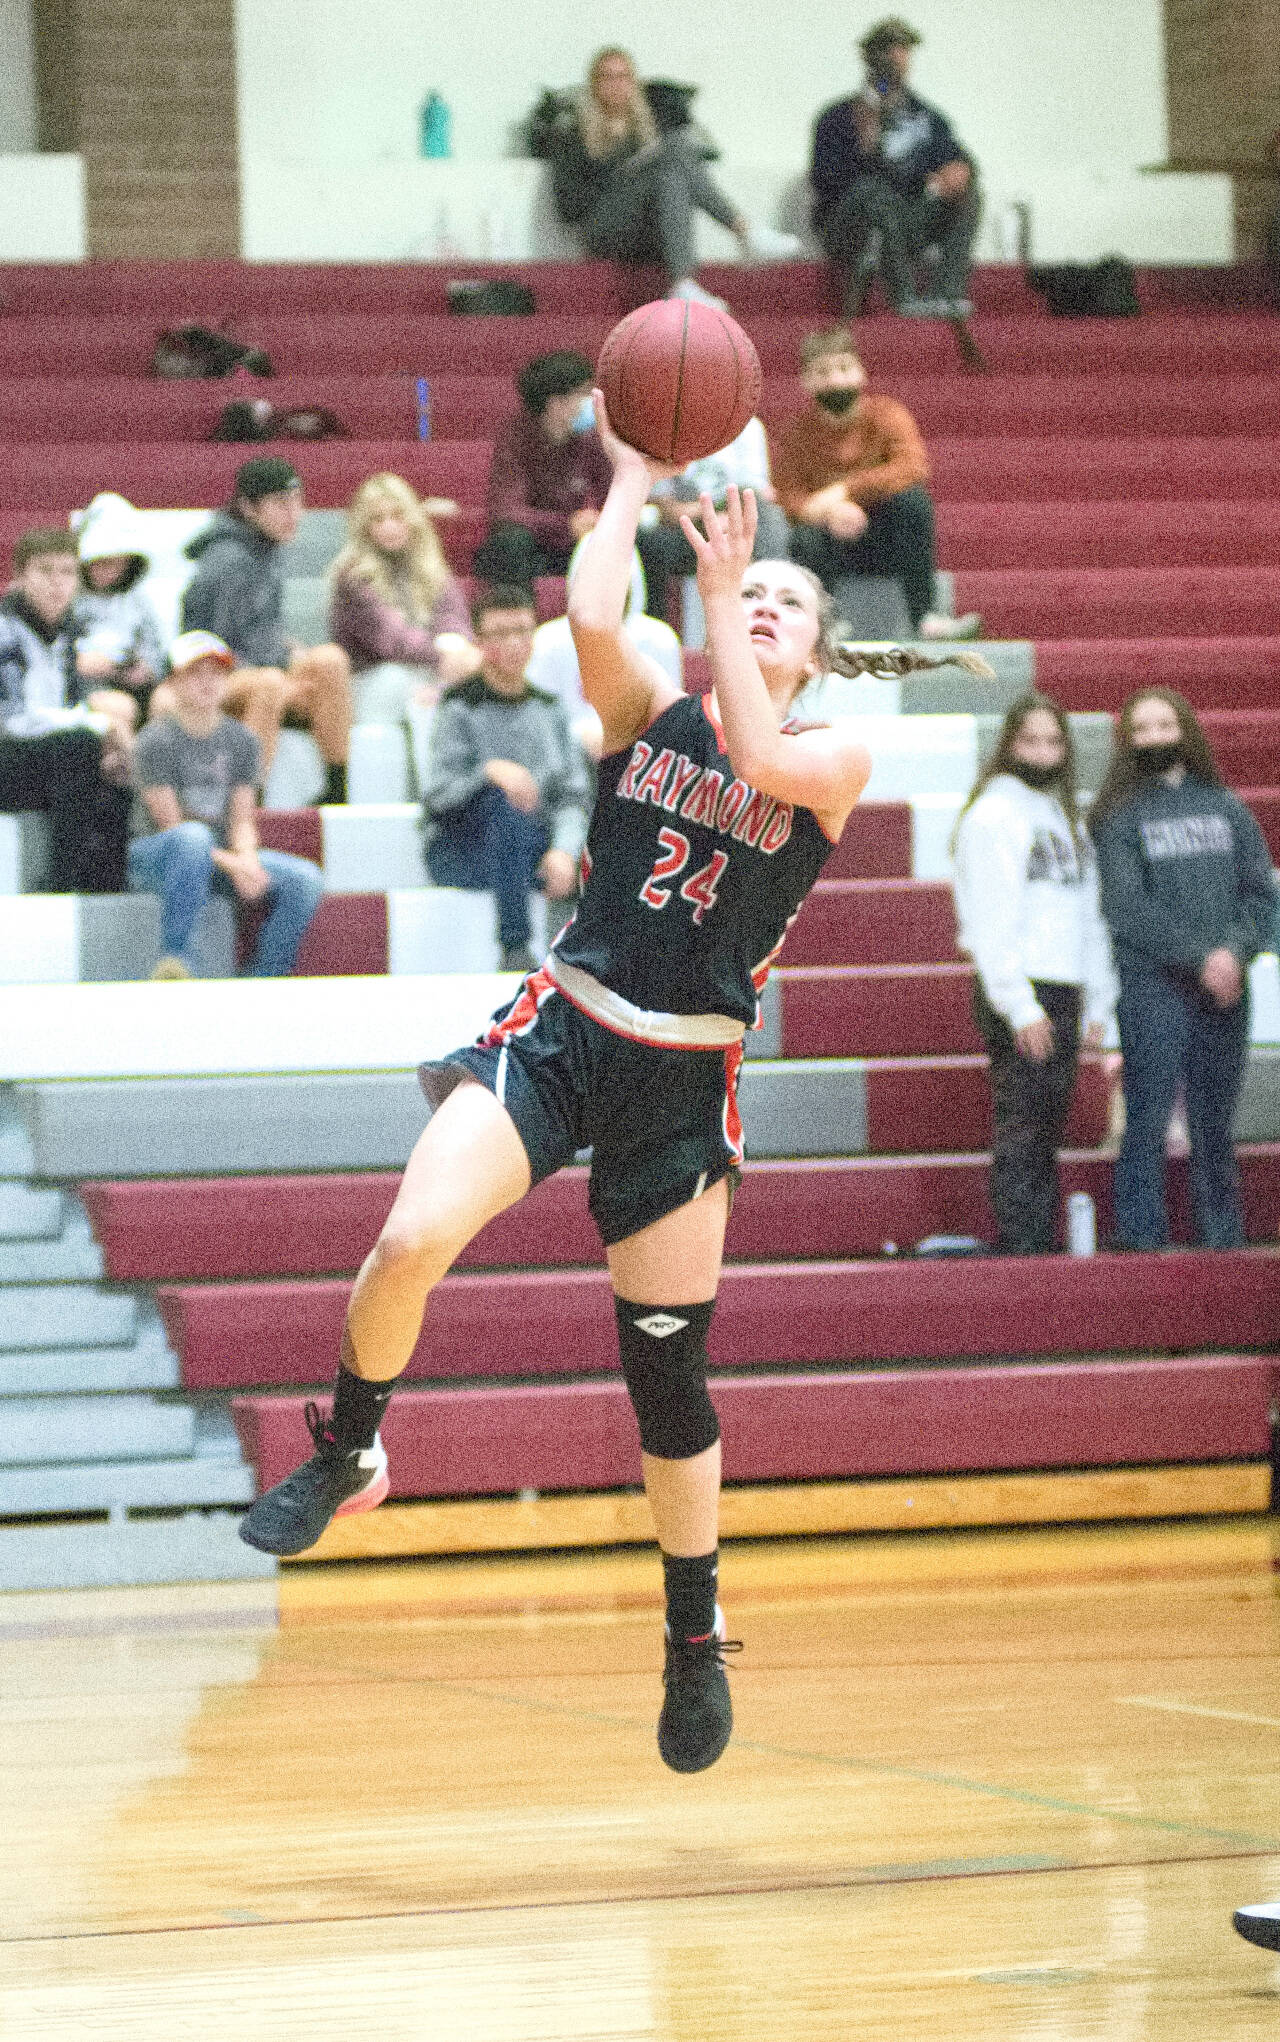 DAILY WORLD FILE PHOTO Raymond freshman guard Karsyn Freeman scored 15 points to help lead the top-ranked Seagulls to a 50-47 victory over Toledo on Monday at Toledo High School.